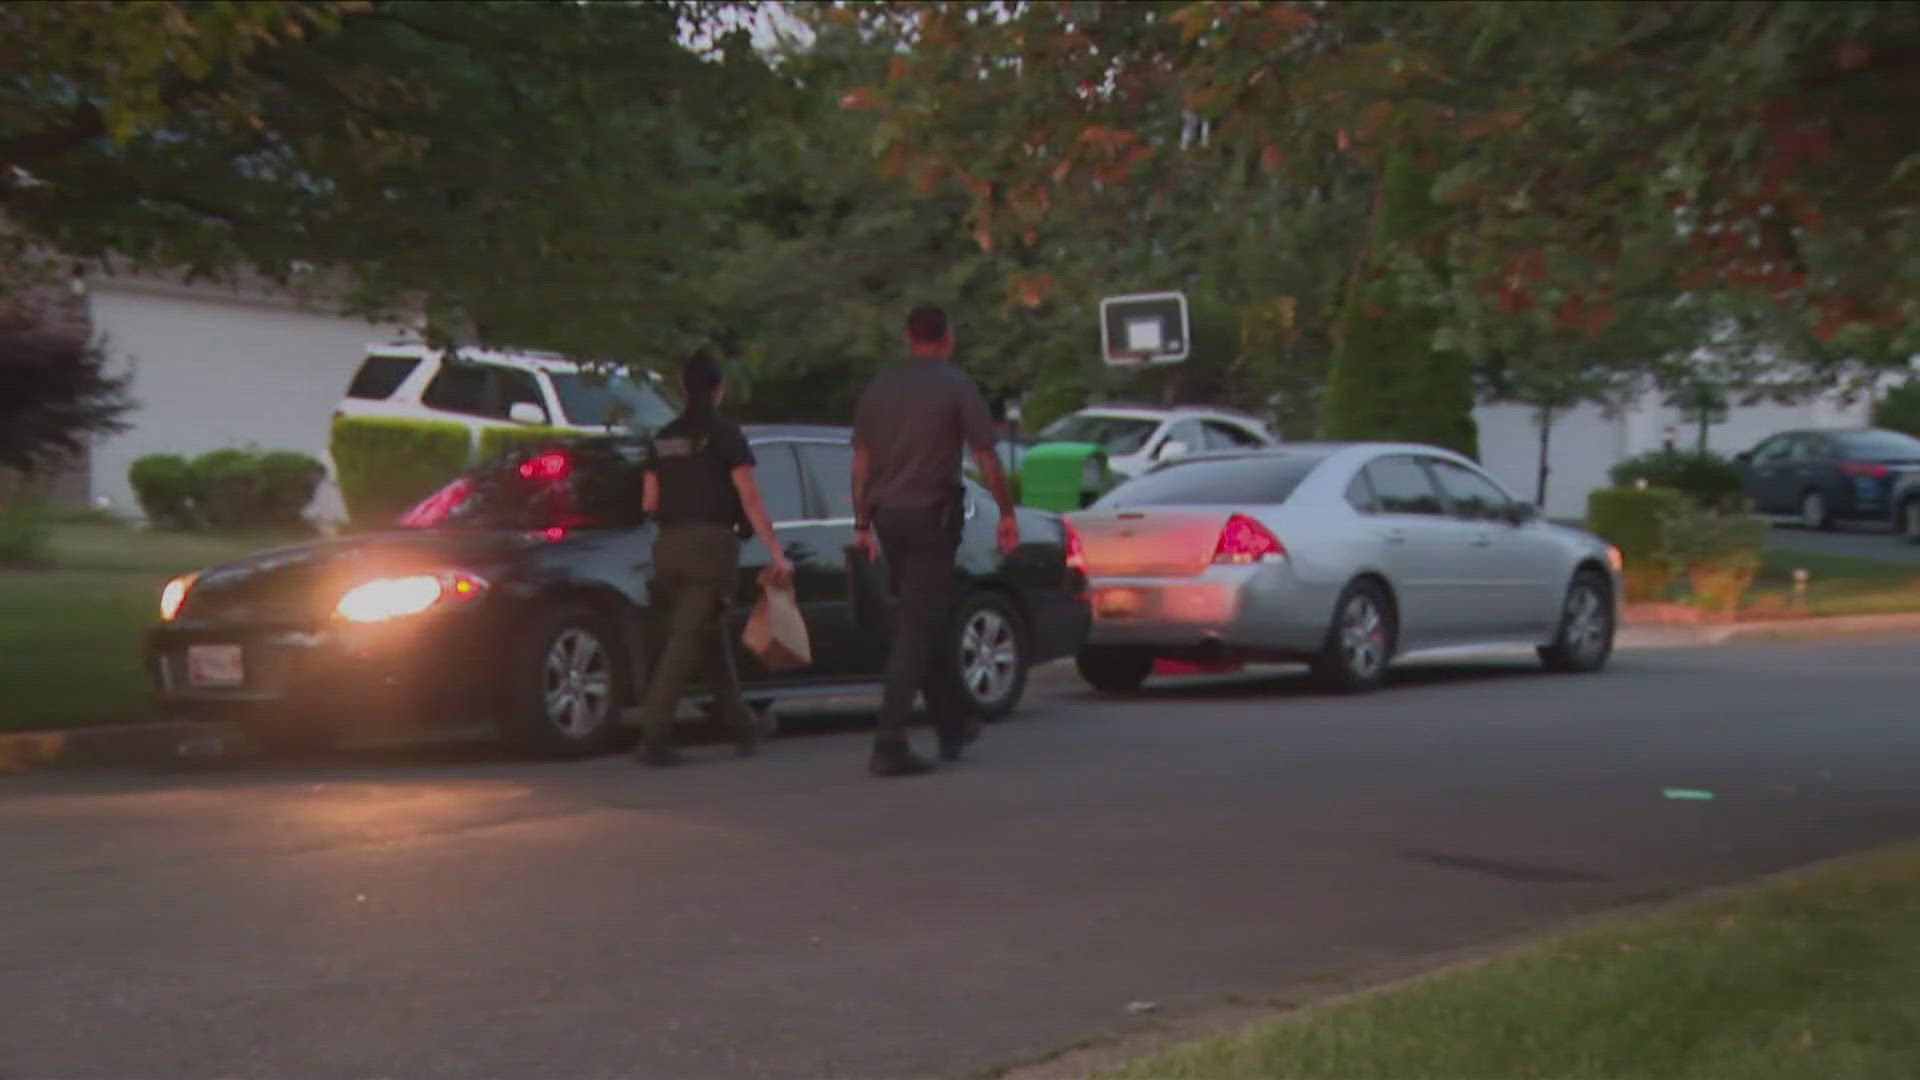 Witnesses tell WUSA9's Katie Lusso that the shooting happened just outside a pool party.